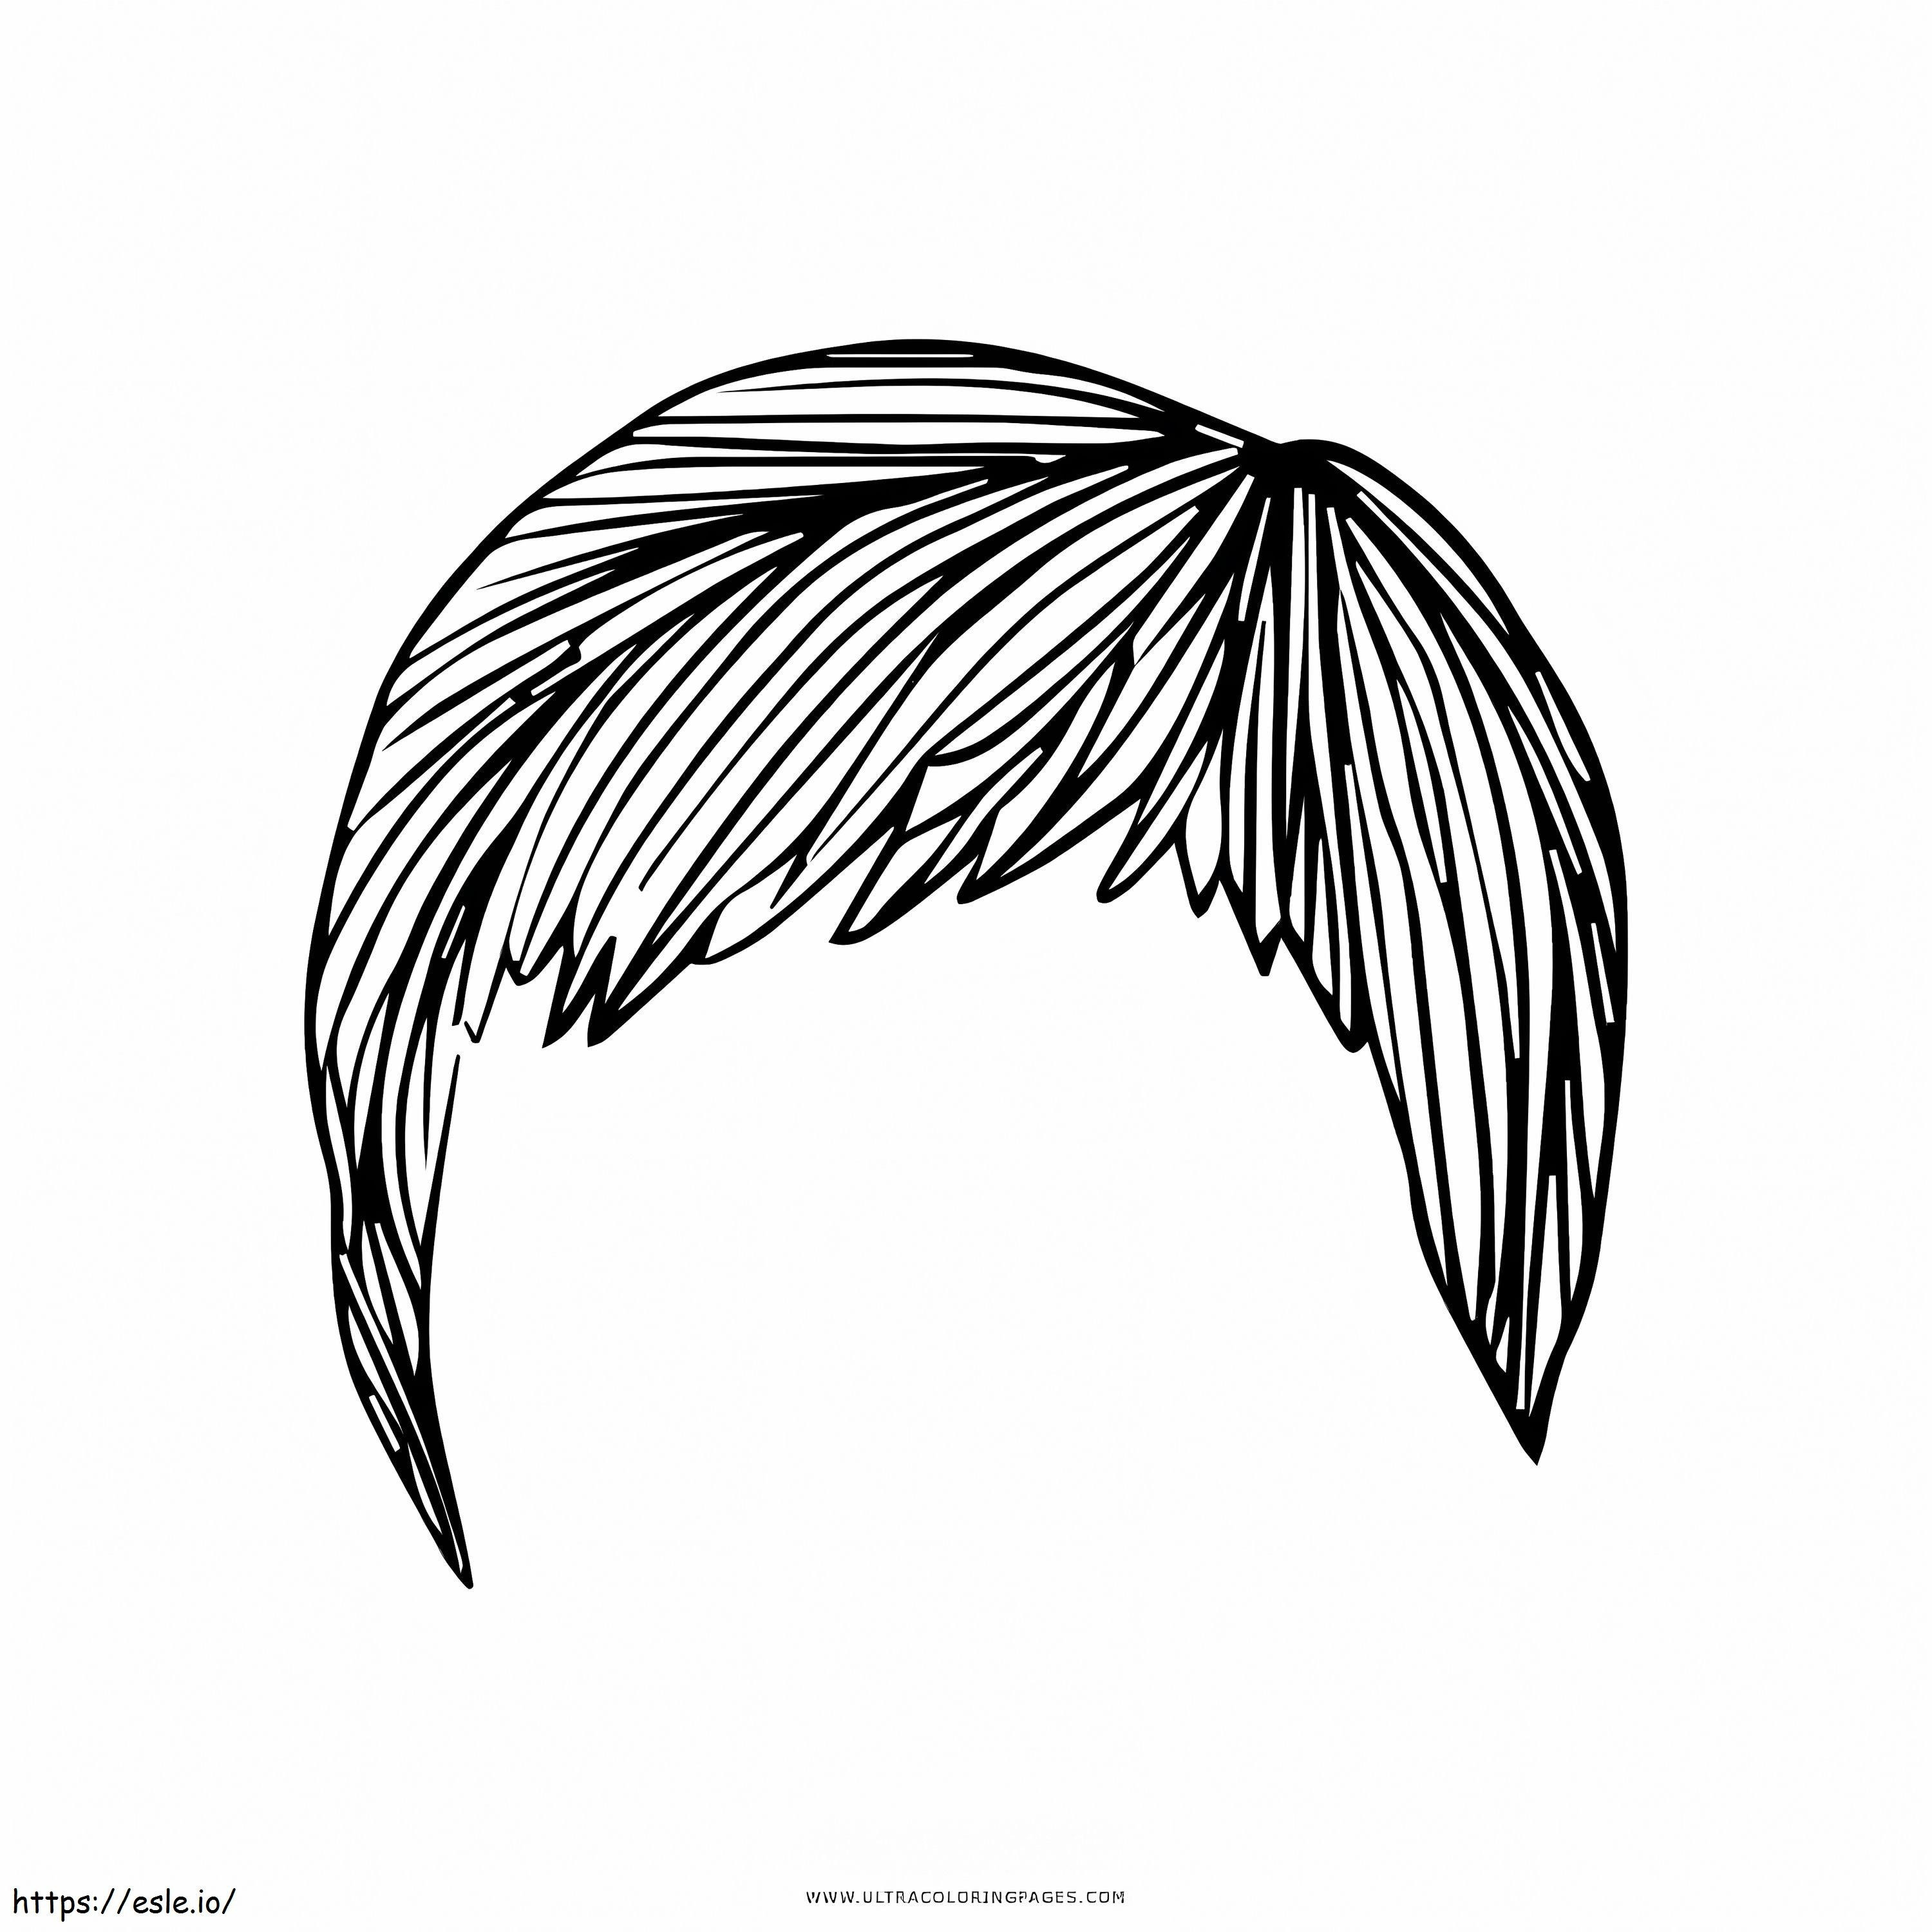 Pixie Hair coloring page